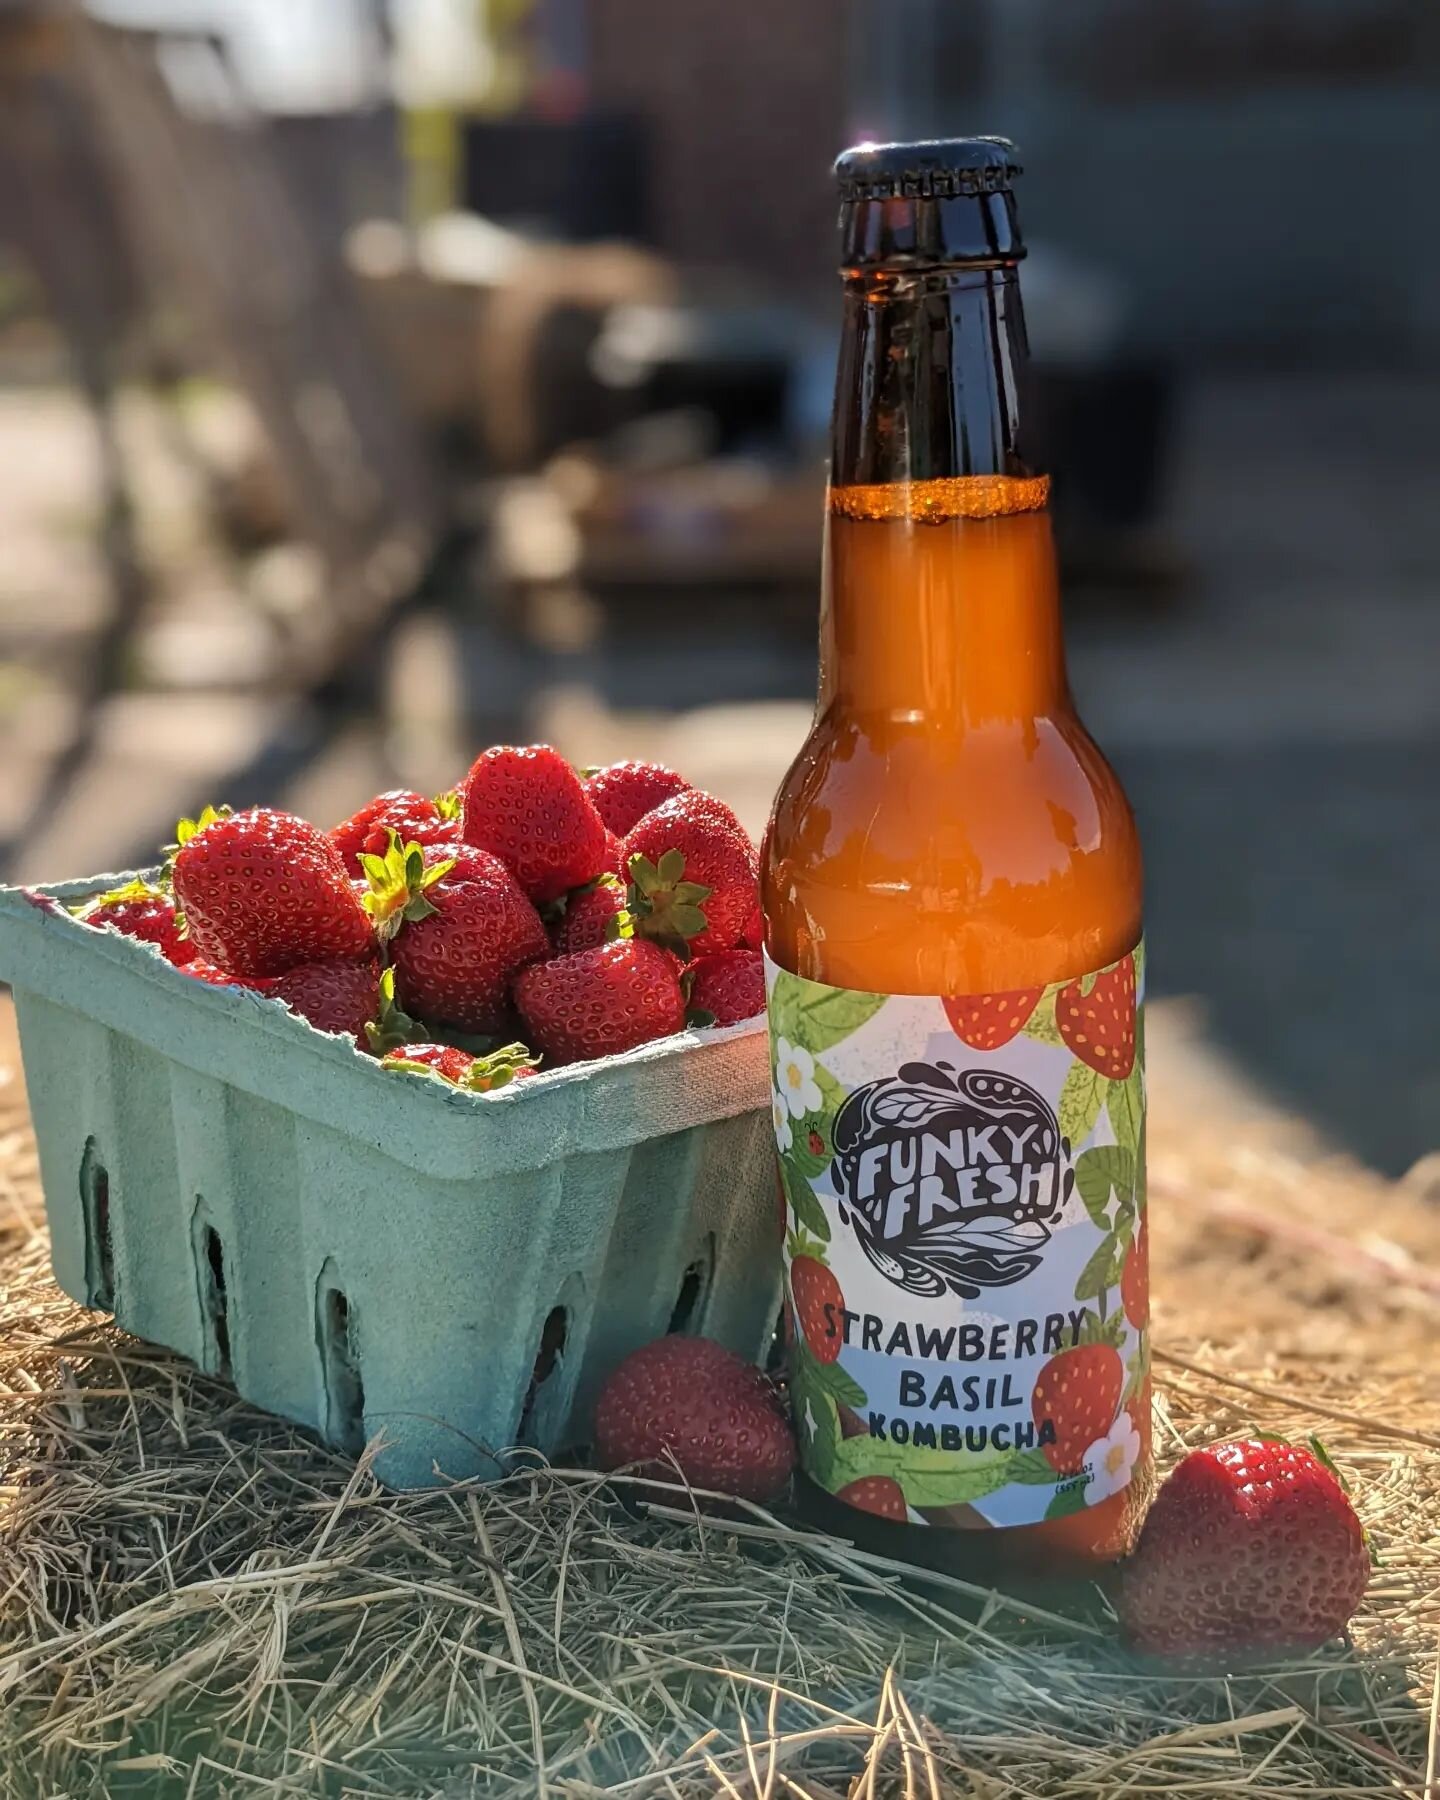 🍓⚡So stoked one of our favorite summer flavors of all time hit shelves this week. Blended with the best strawberries I've ever had from @honey_brook_harvest_collective as well holy basil, sweet basil, lemon verbena, and lemon balm for a refreshing &